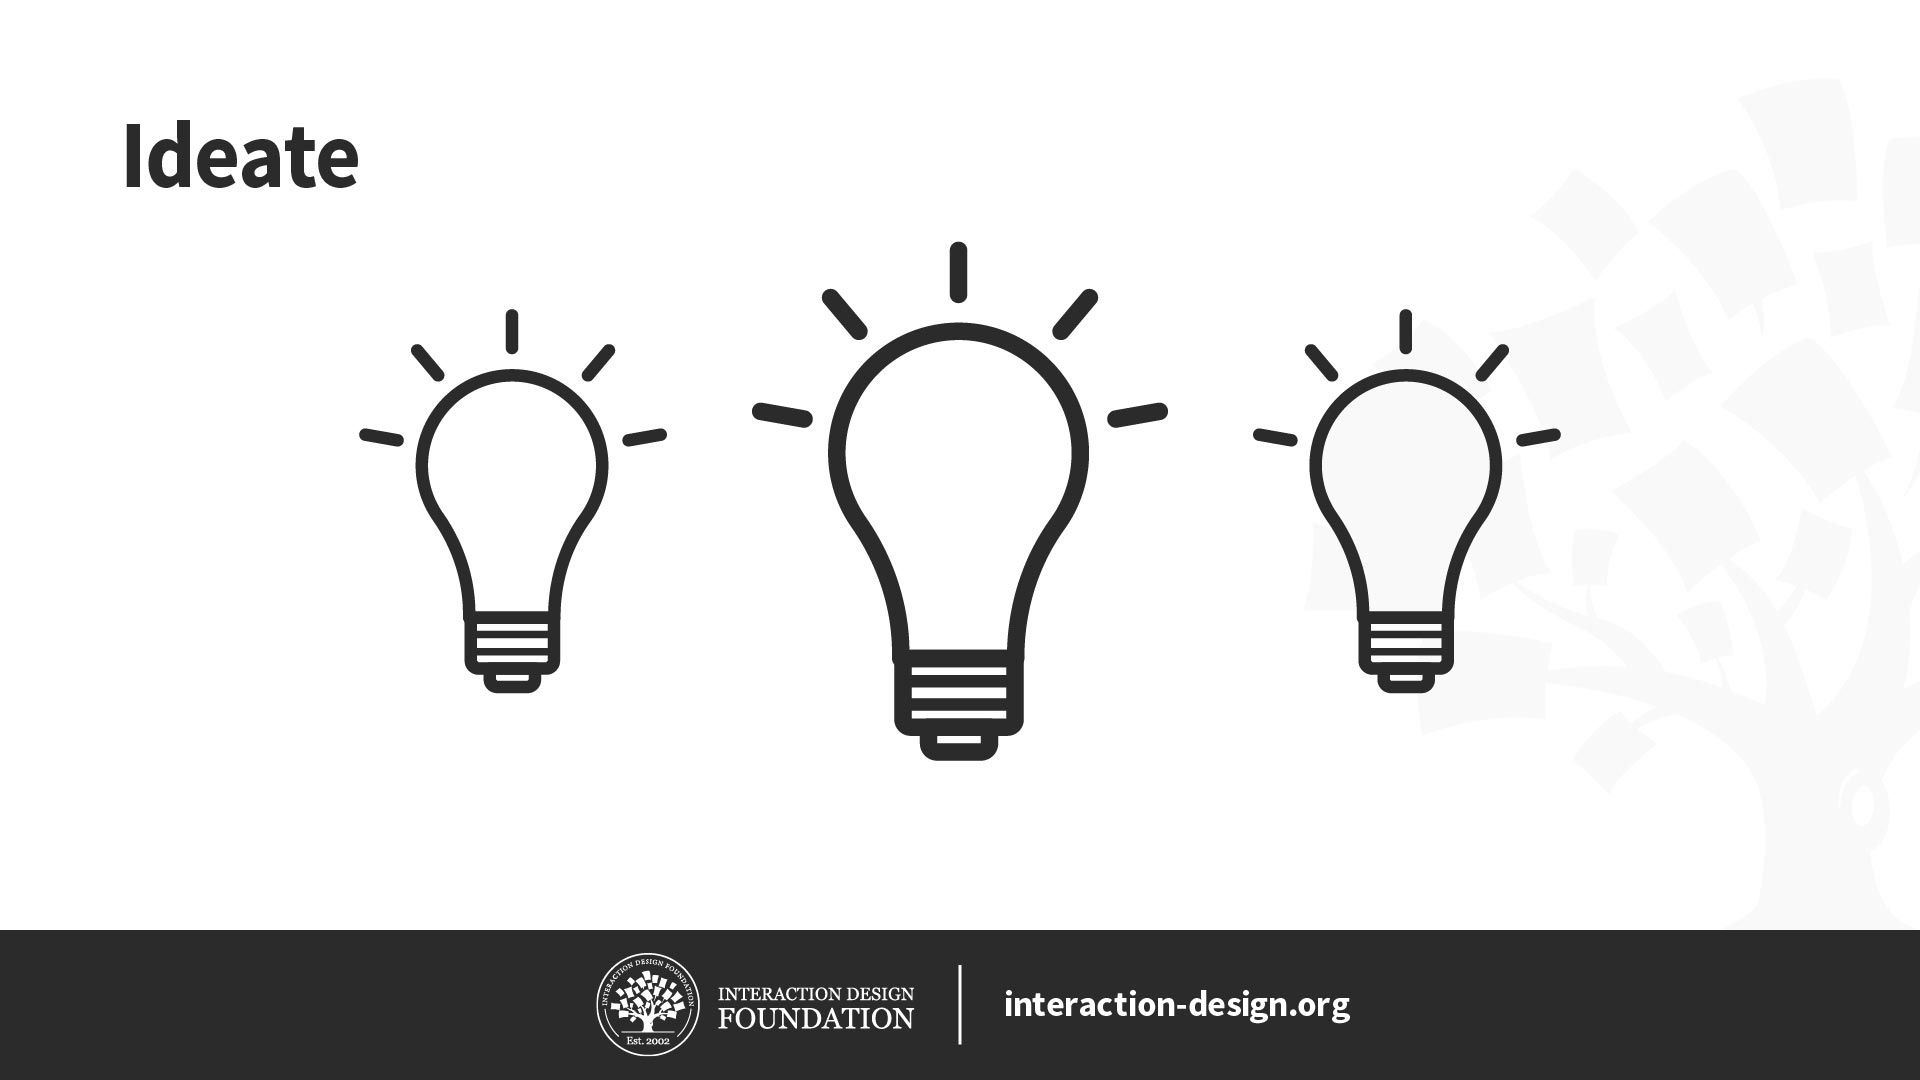 Illustration of three light bulbs going off as a representation of the Ideate part of the design process.